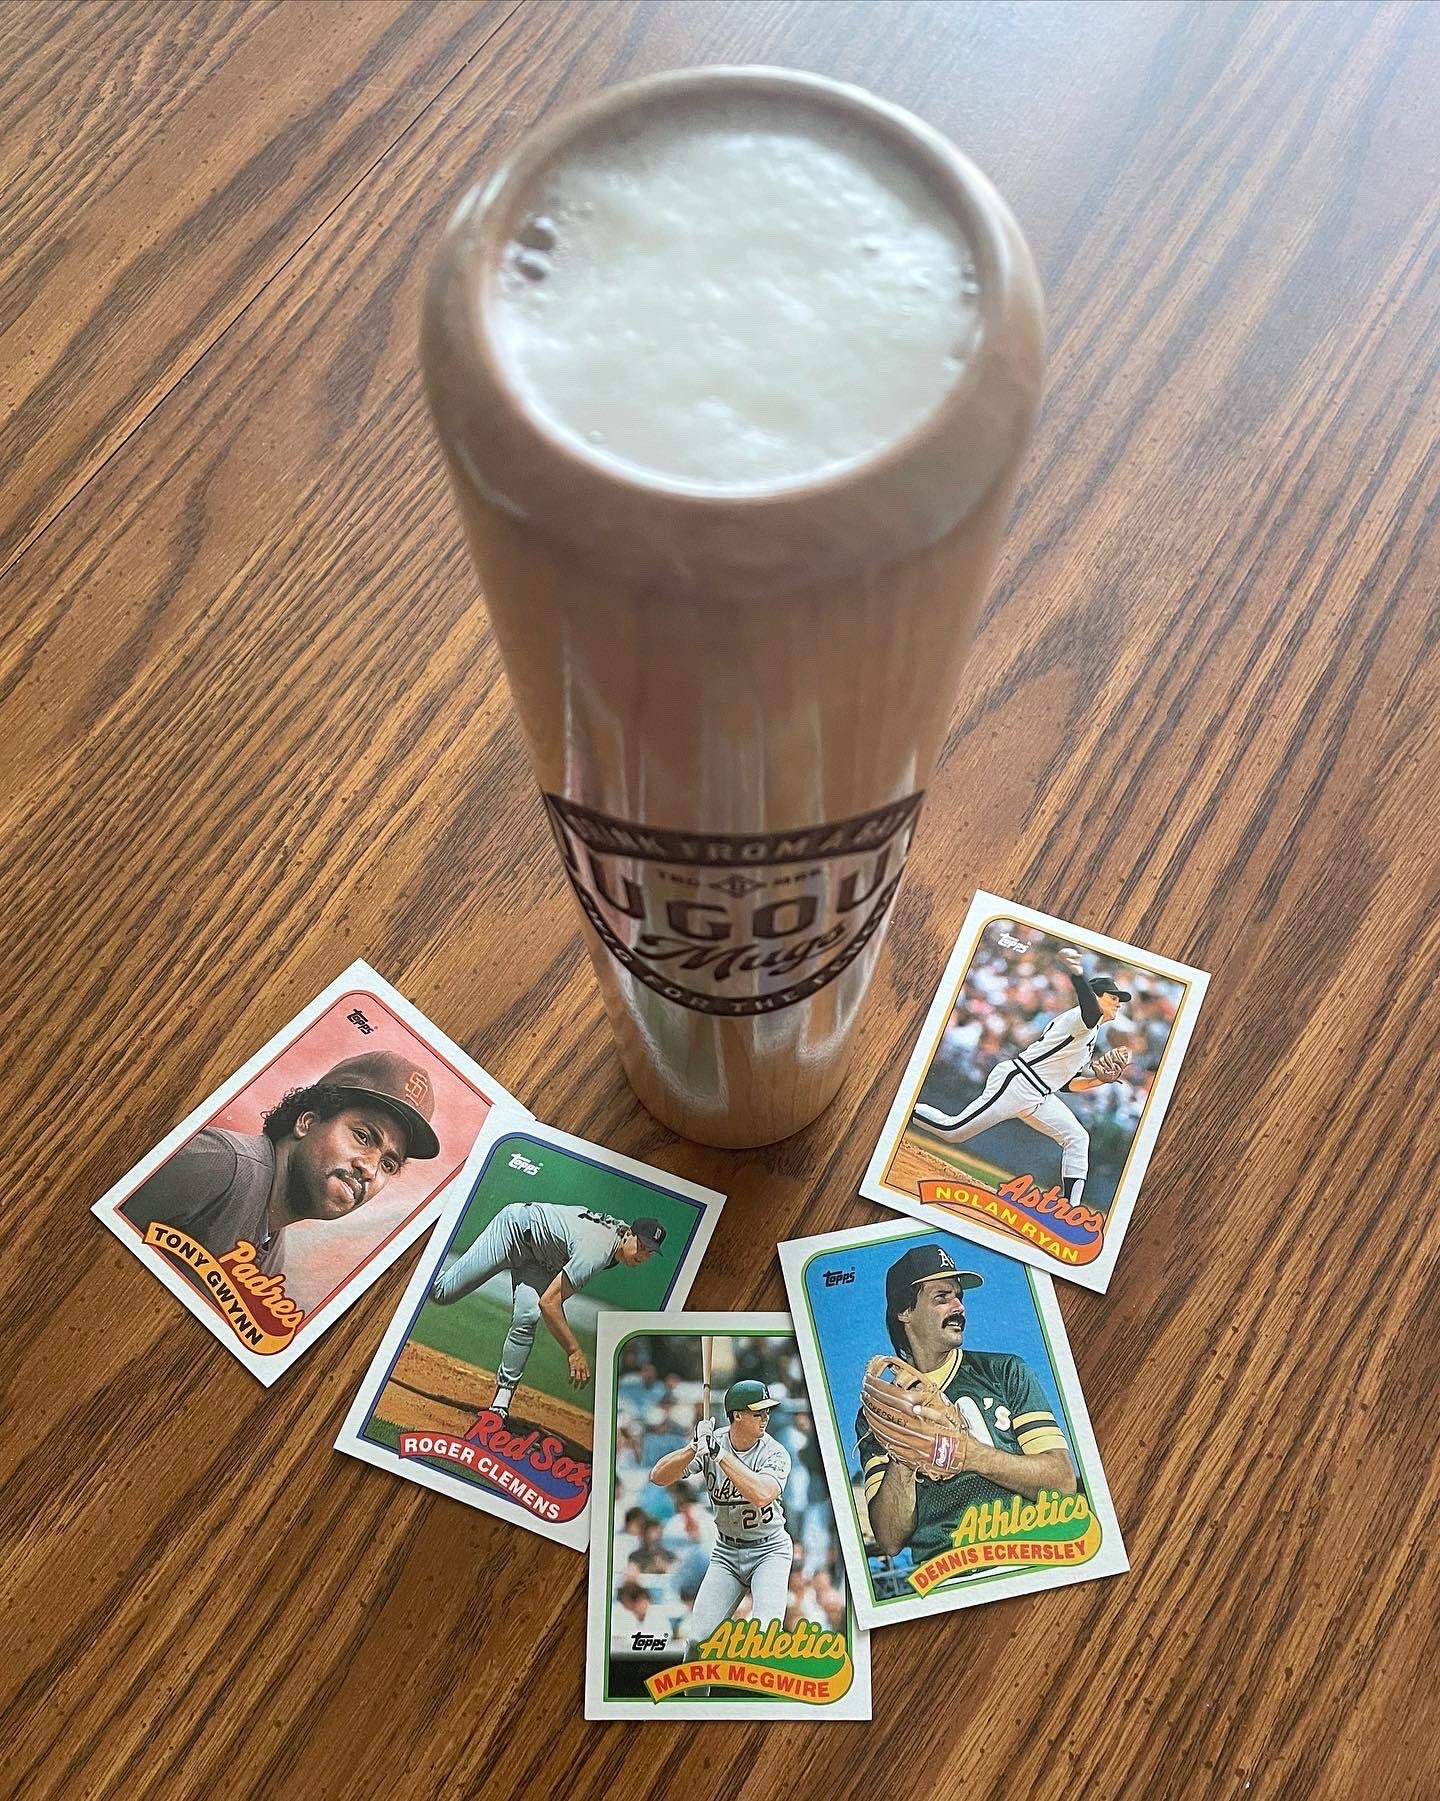 Nostalgia Packed In Every Dugout Mugs Order